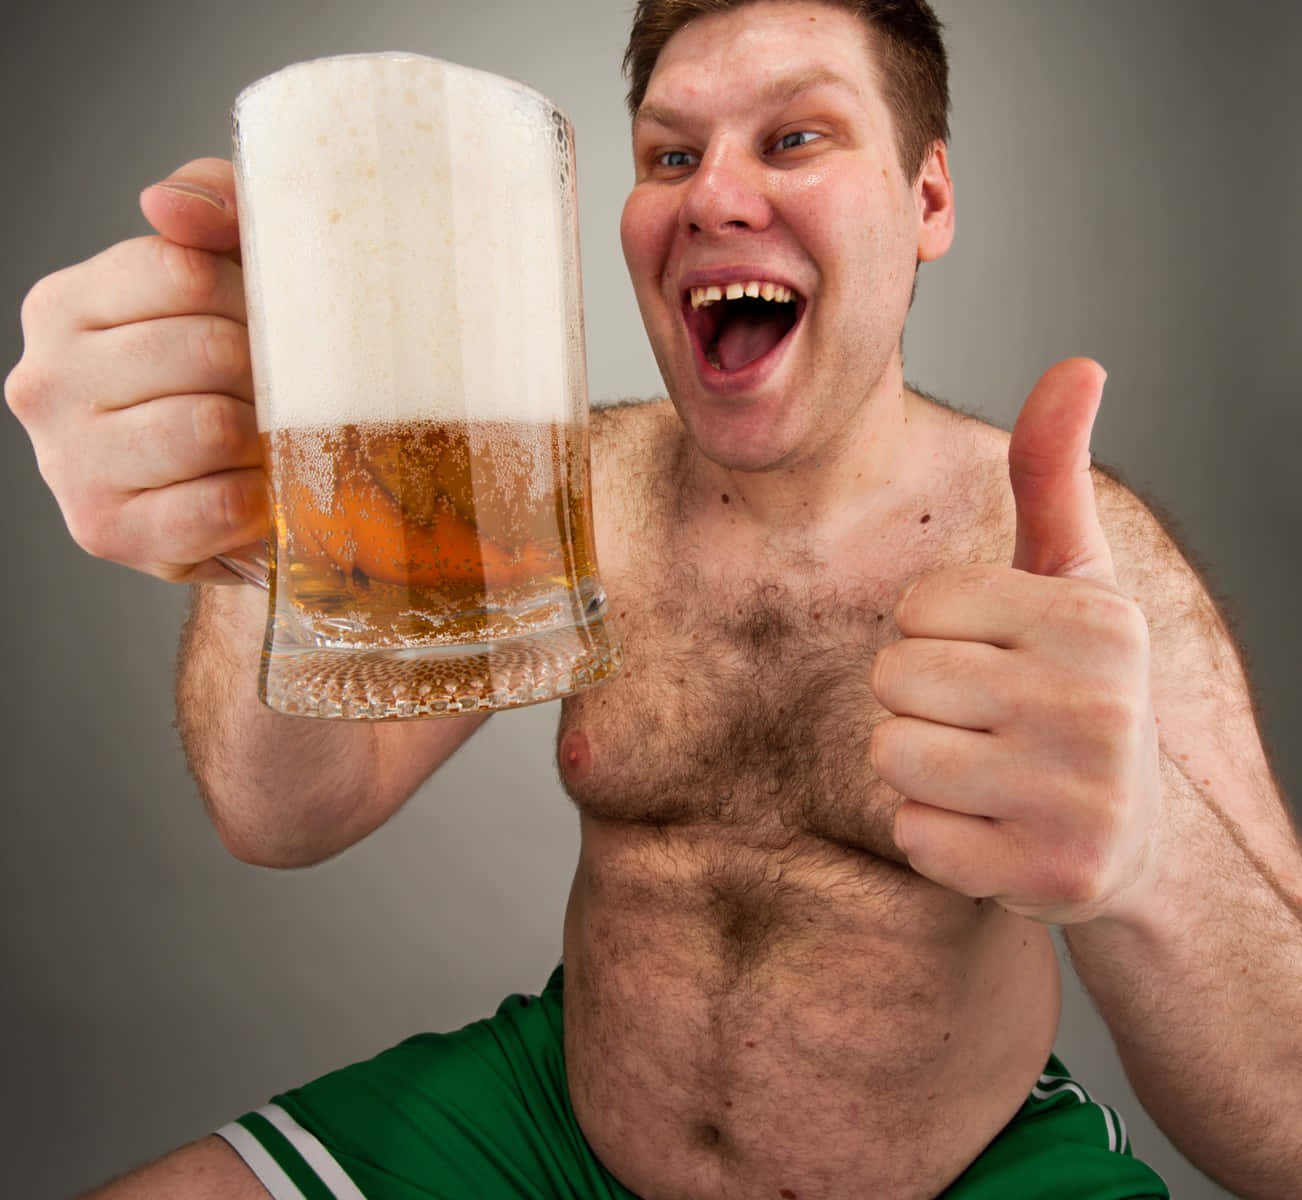 A Man With A Beer Mug Holding Up A Thumbs Up